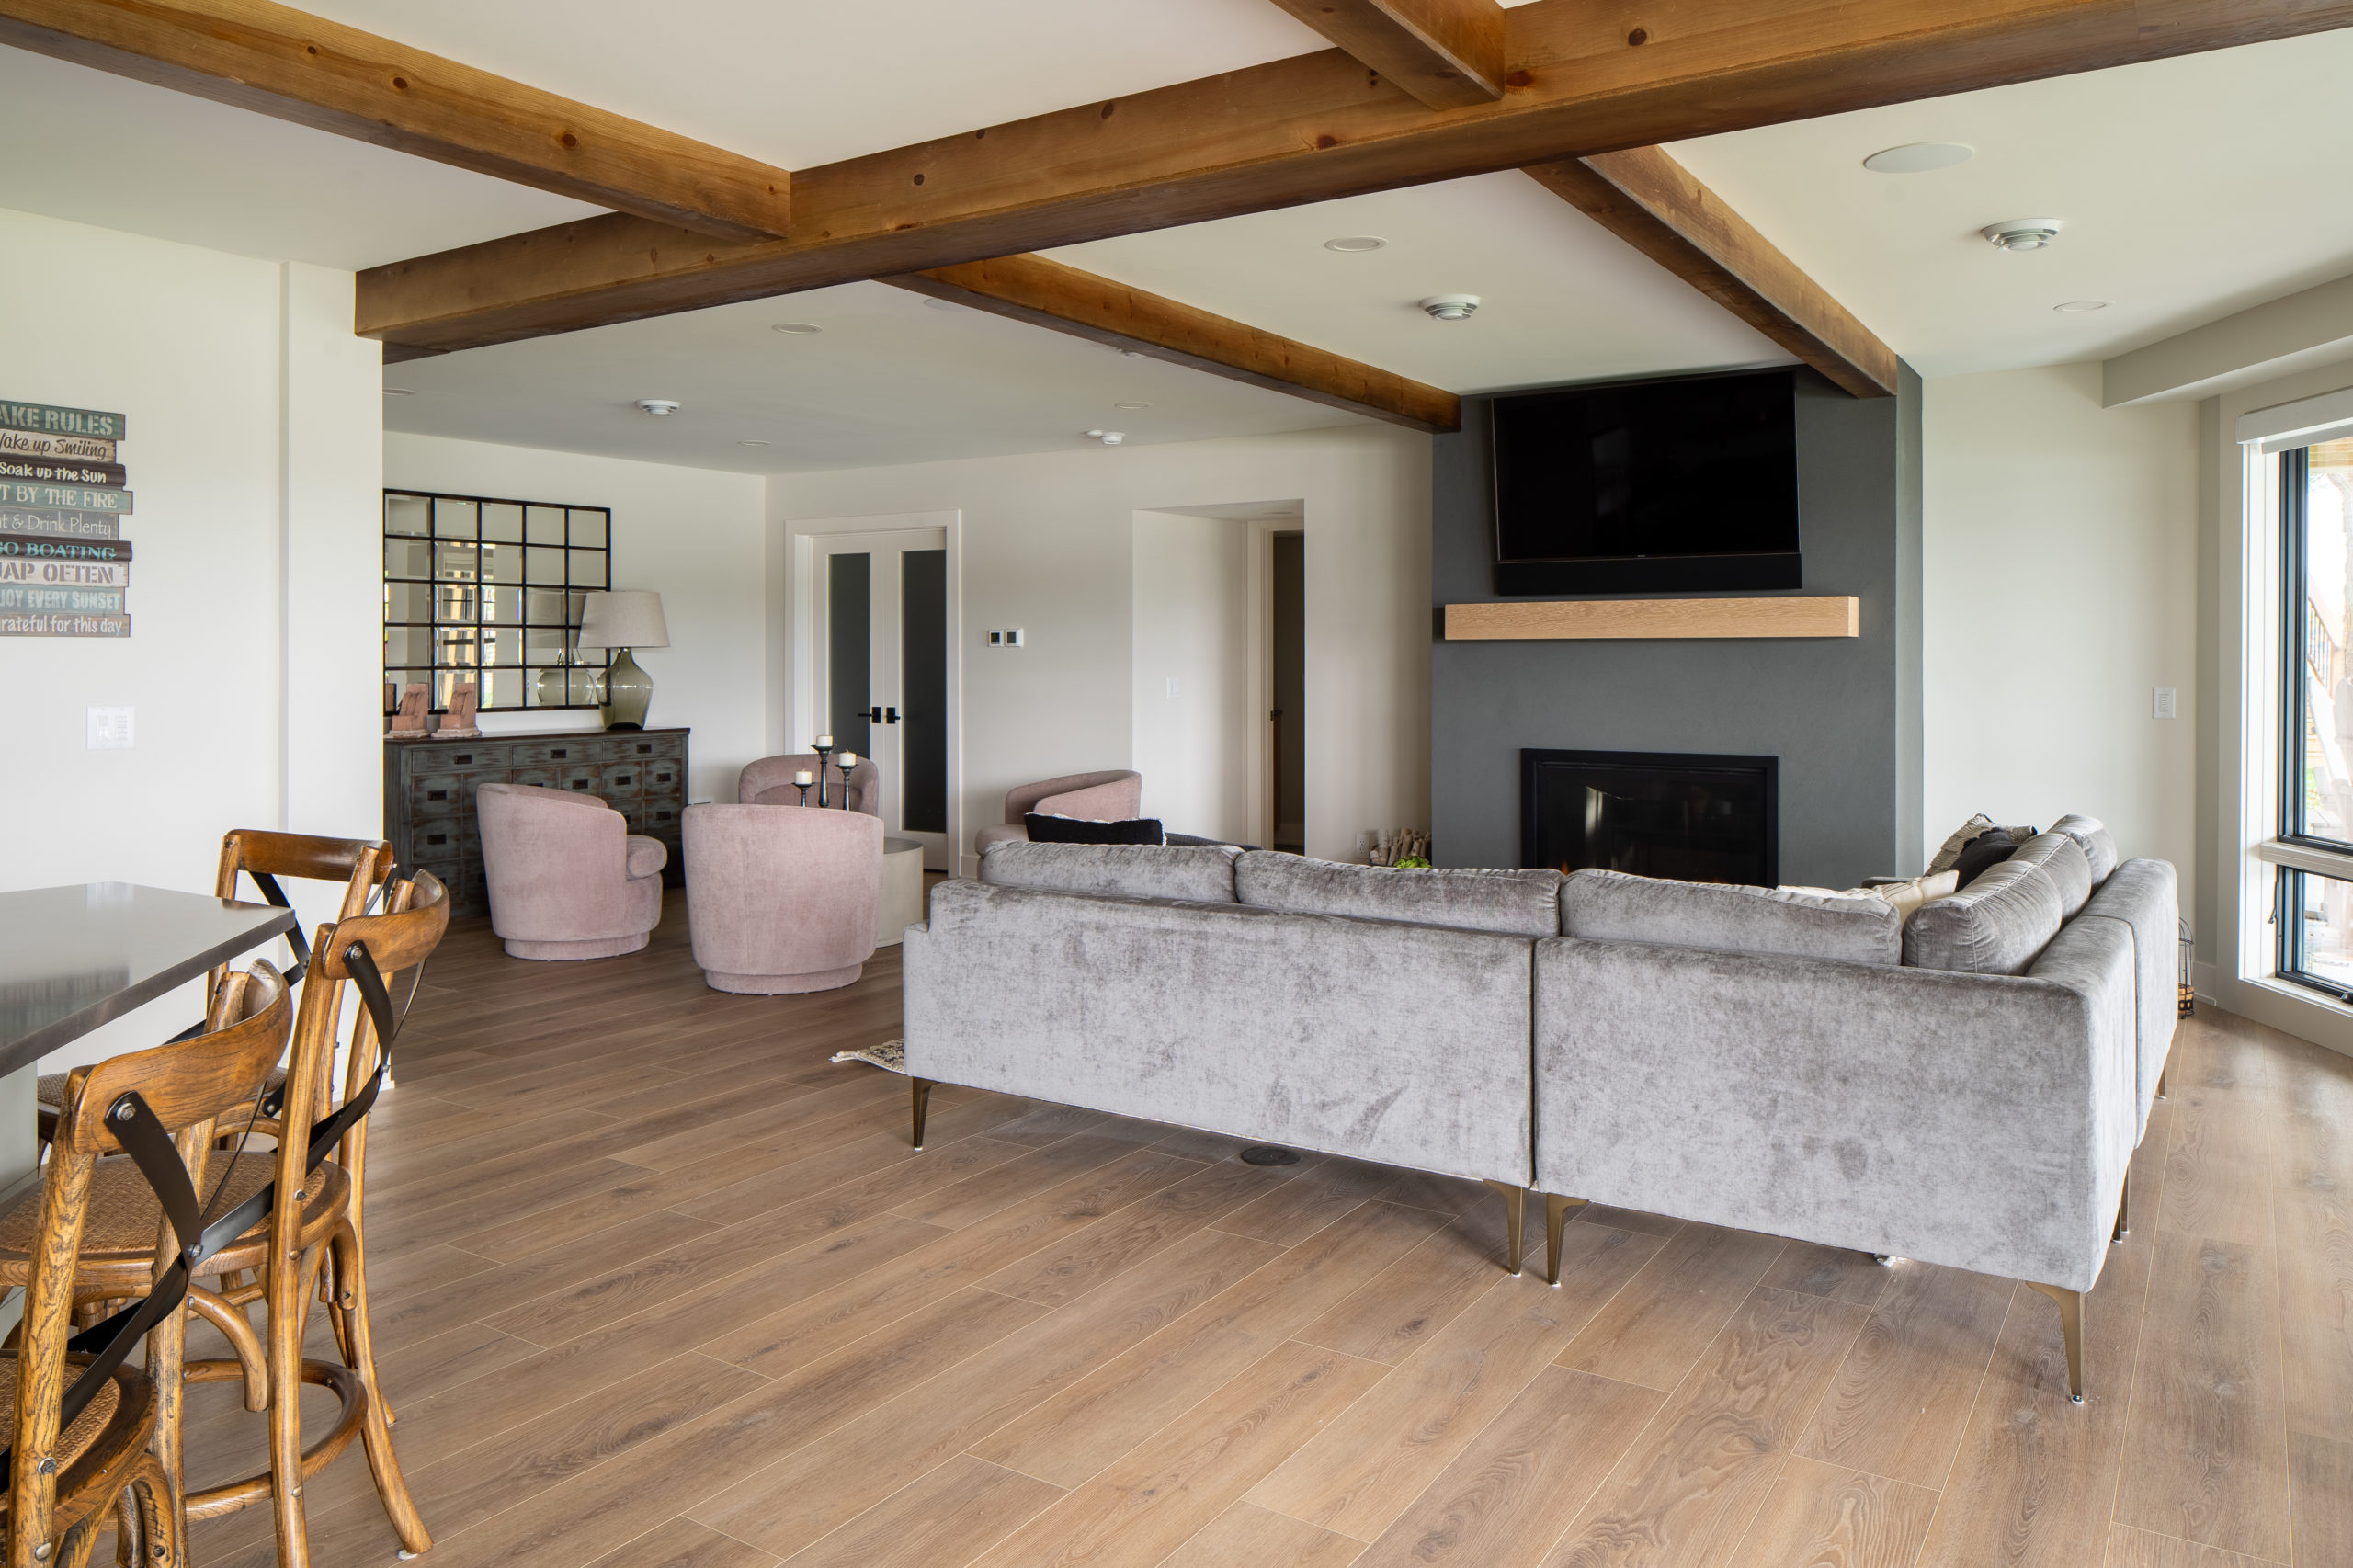 The Lake Escape custom home remodel now features a cozy living room with wood beams and a fireplace.